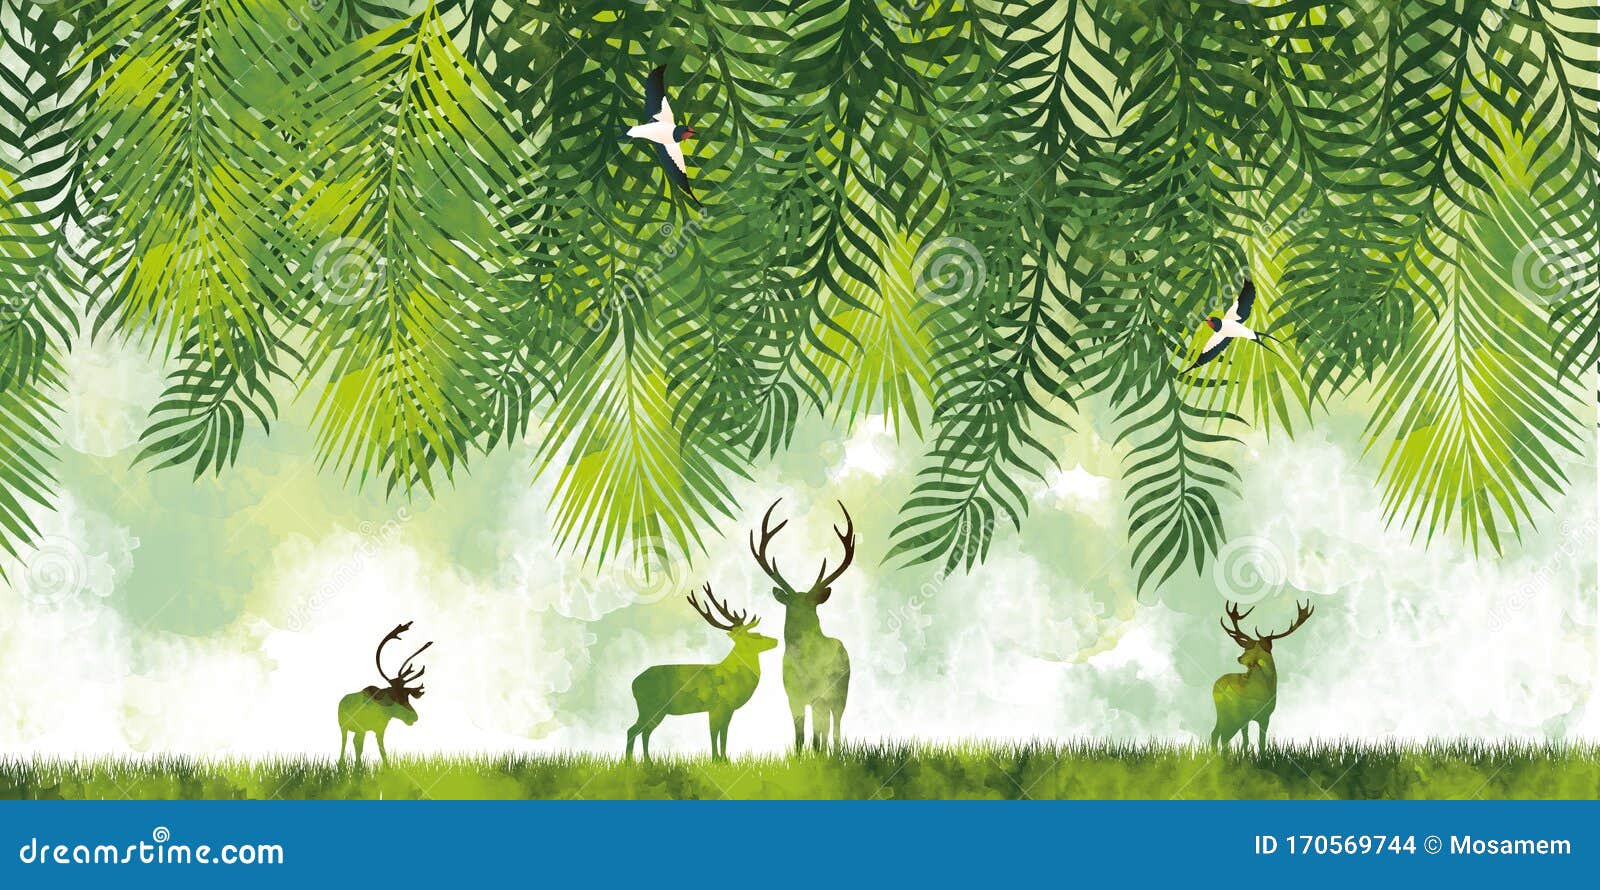 3d Modern Art Mural Wallpaper with Jungle , Forest Background . Green Deer,  Black Christmas Tree , with White Birds . Suitable F Stock Illustration -  Illustration of paradise, summer: 170569744